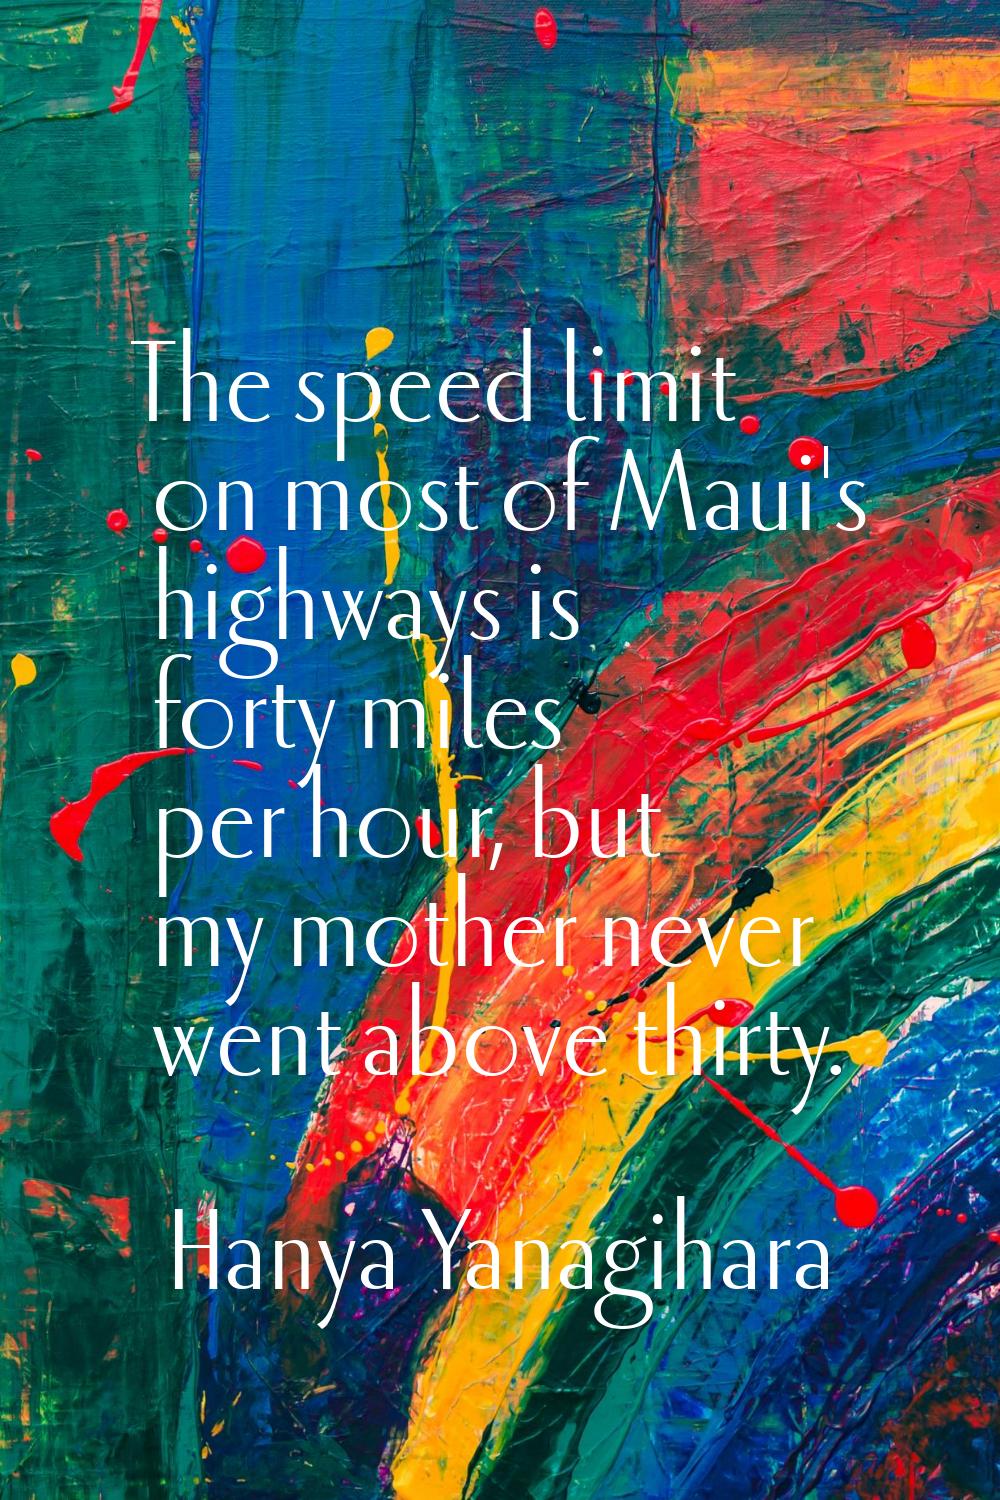 The speed limit on most of Maui's highways is forty miles per hour, but my mother never went above 